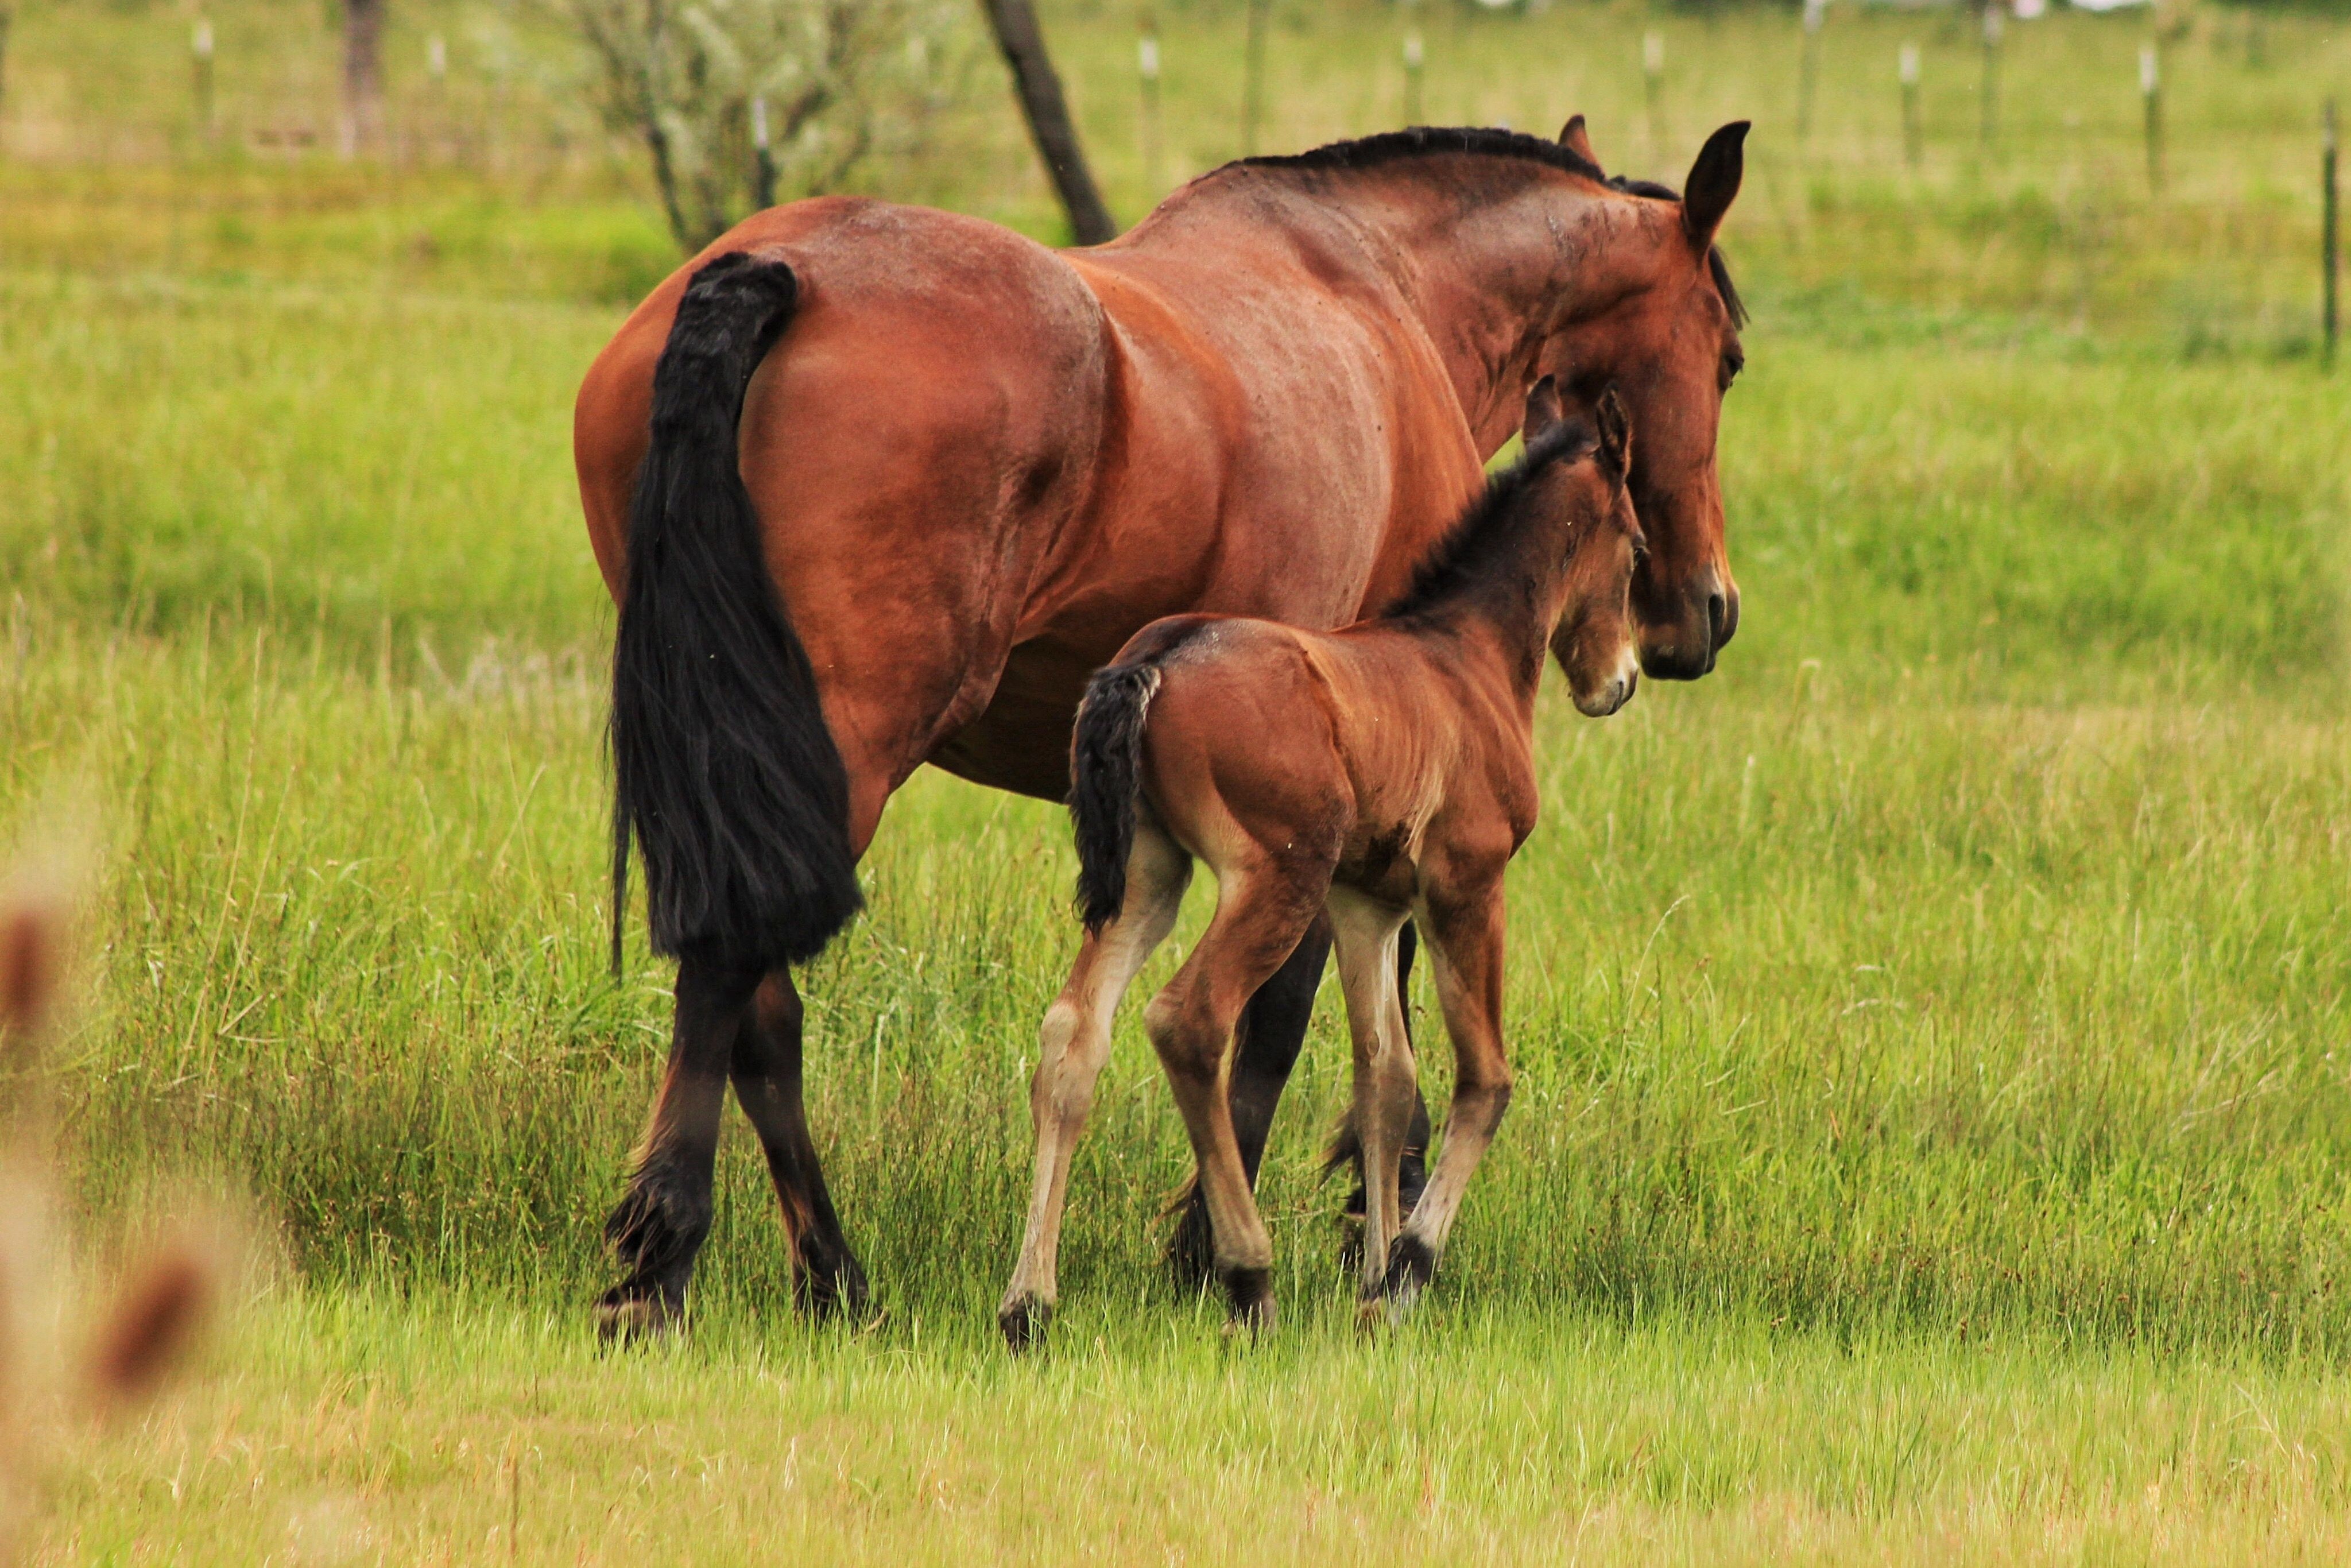 Horse With Foal On Grassy Field